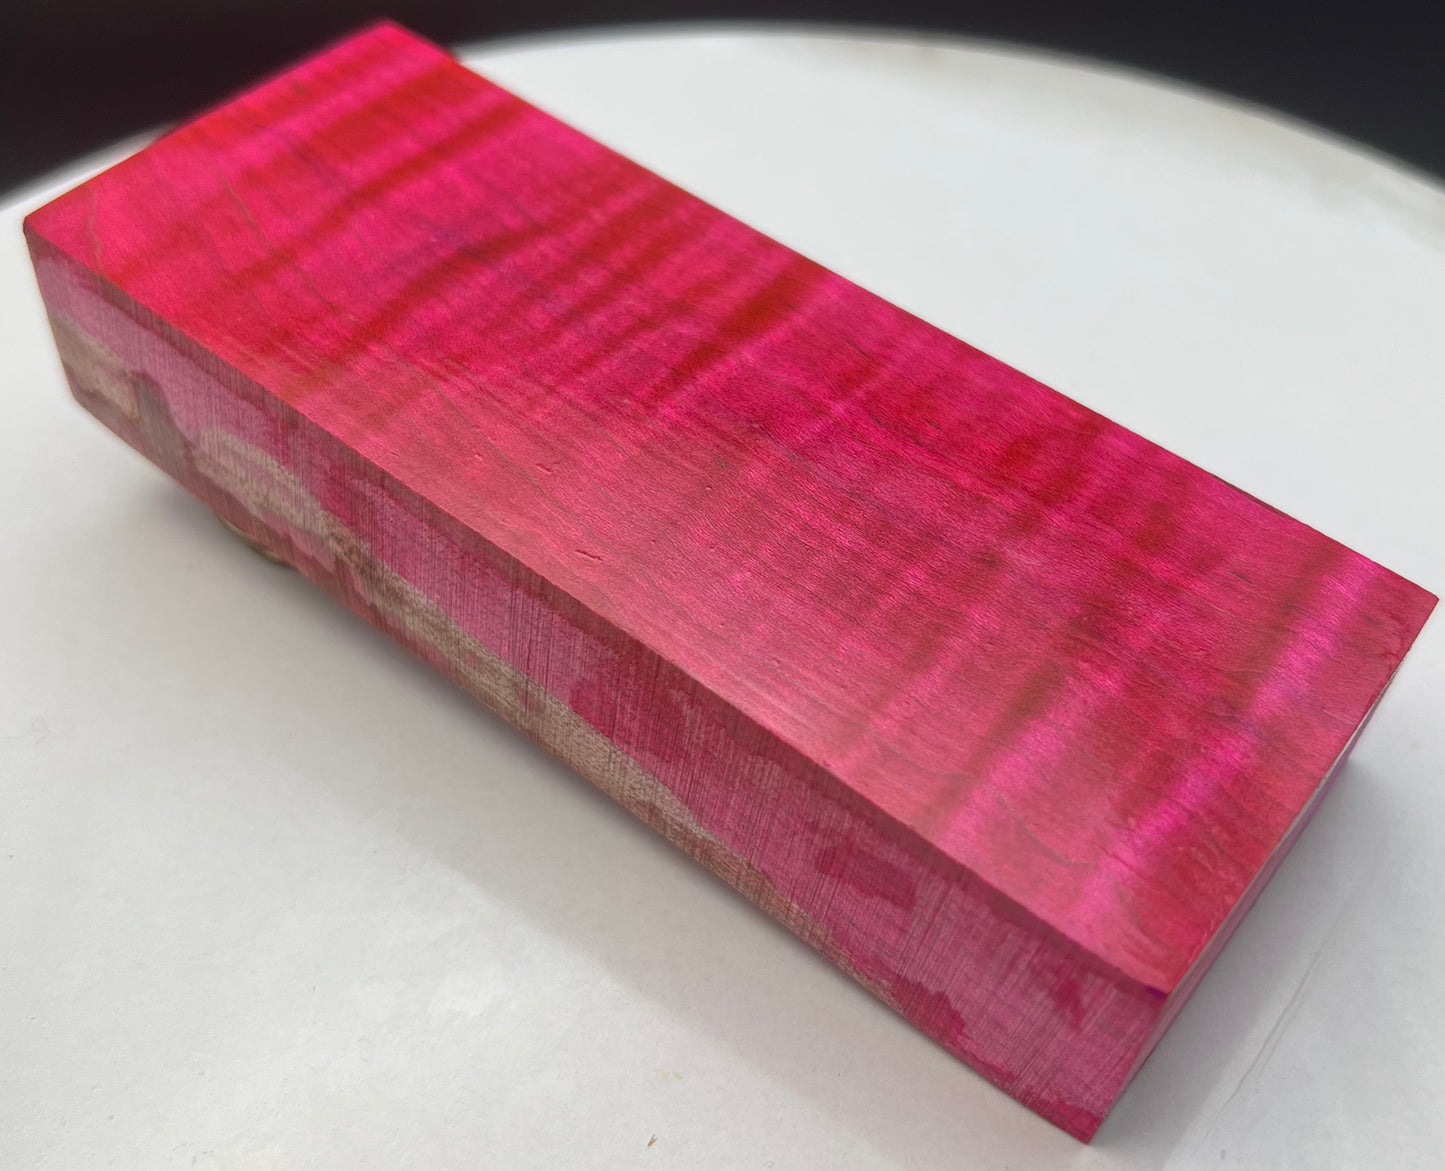 Stabilized Curly Maple Knife Block Hot Pink